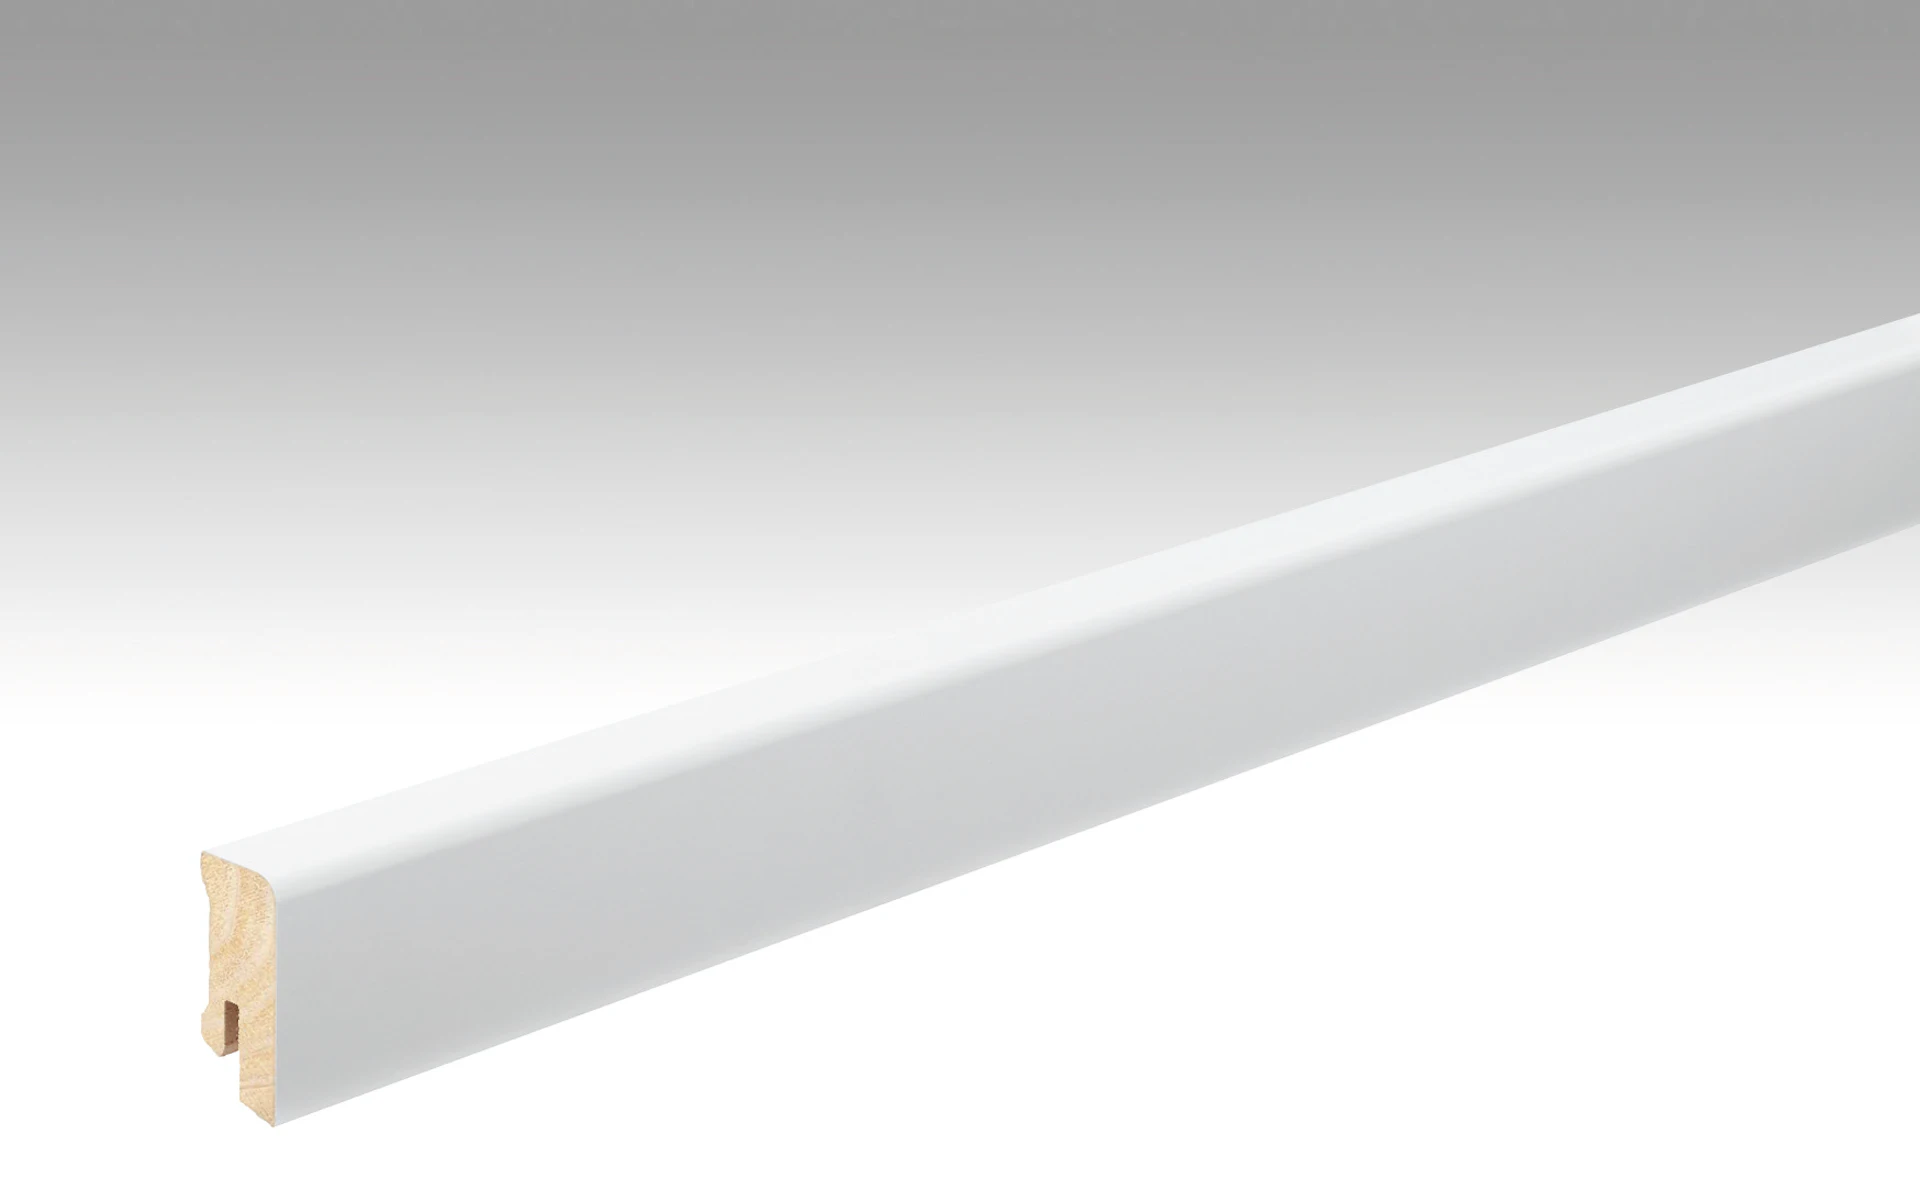 MEISTER Skirtings White DF (RAL 9016) 2266 - 2380 x 38 x 16 mm (200040-2380-02266)